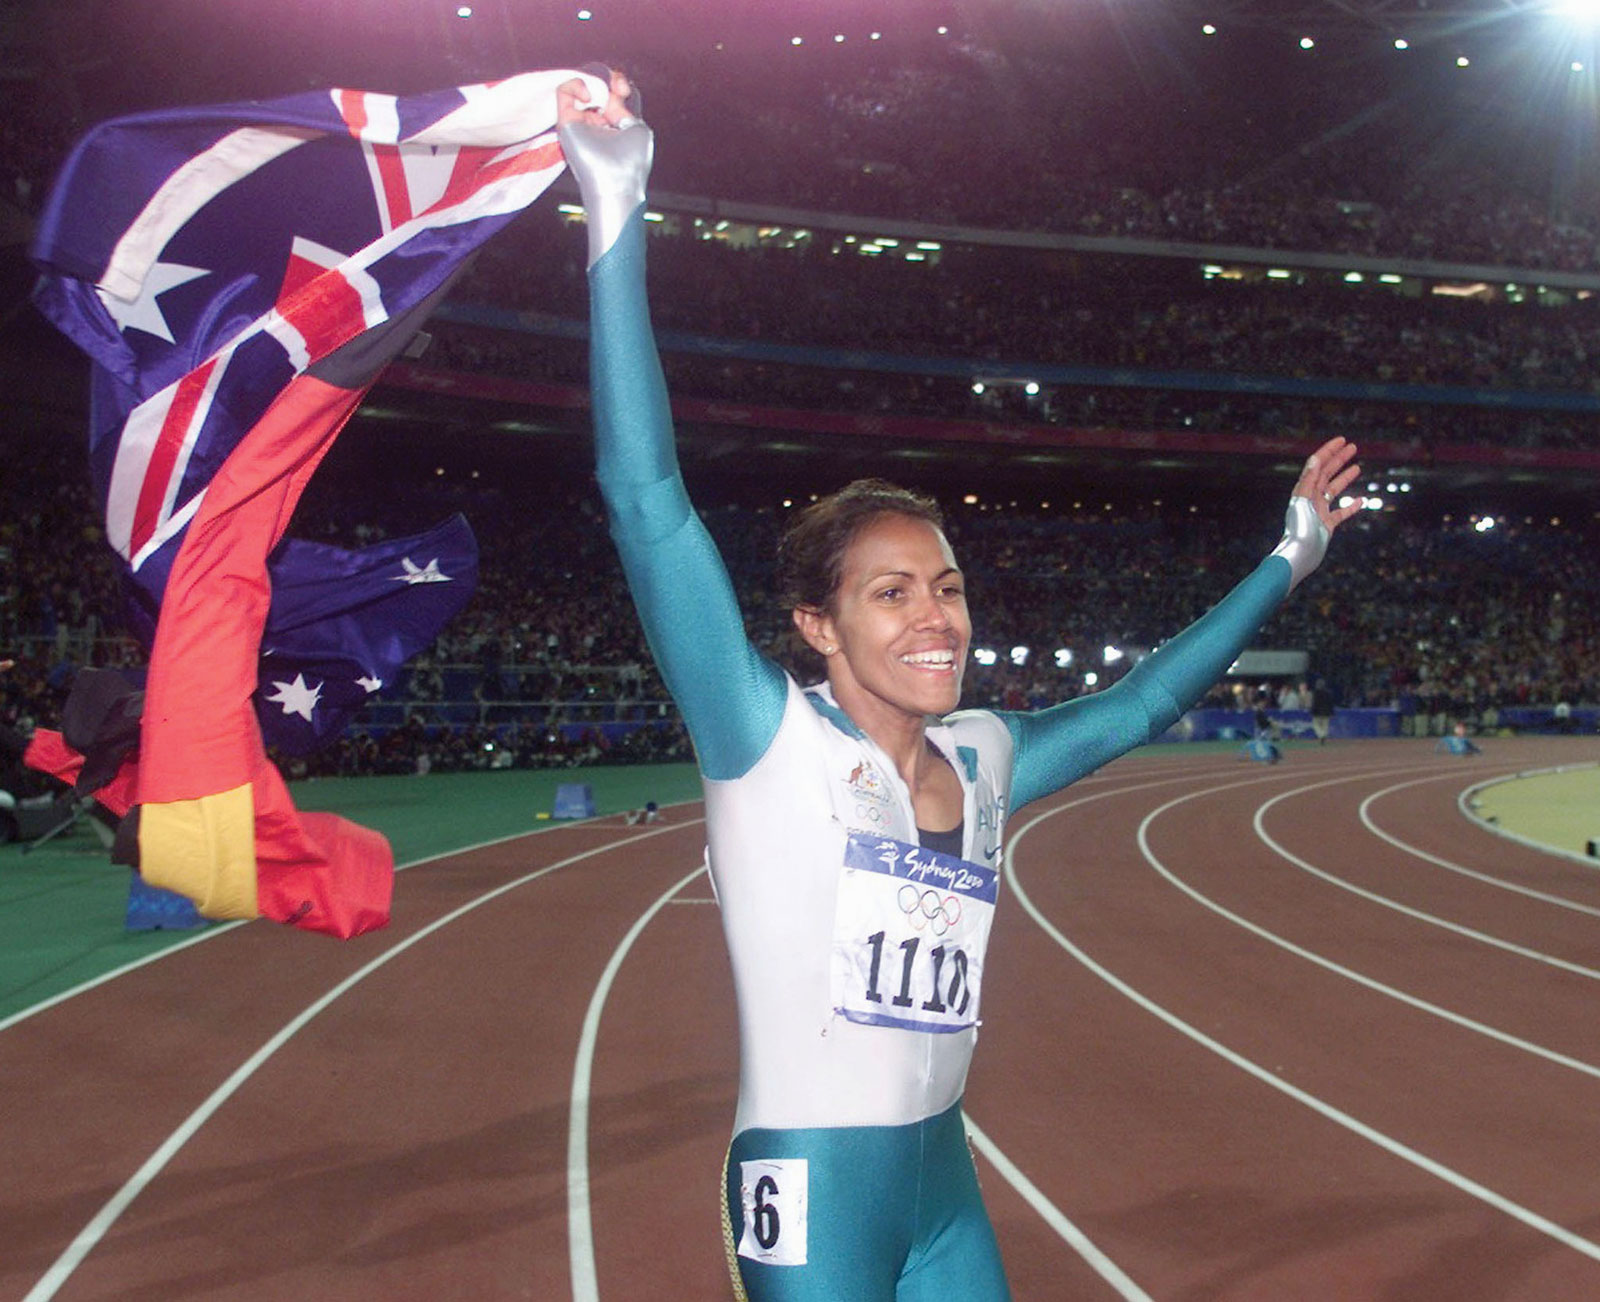 Cathy Freeman carried both the Australian and Aboriginal flags during her lap of honour after winning the Olympic gold medal in the 400 metres at Sydney 2000 ©Getty Images